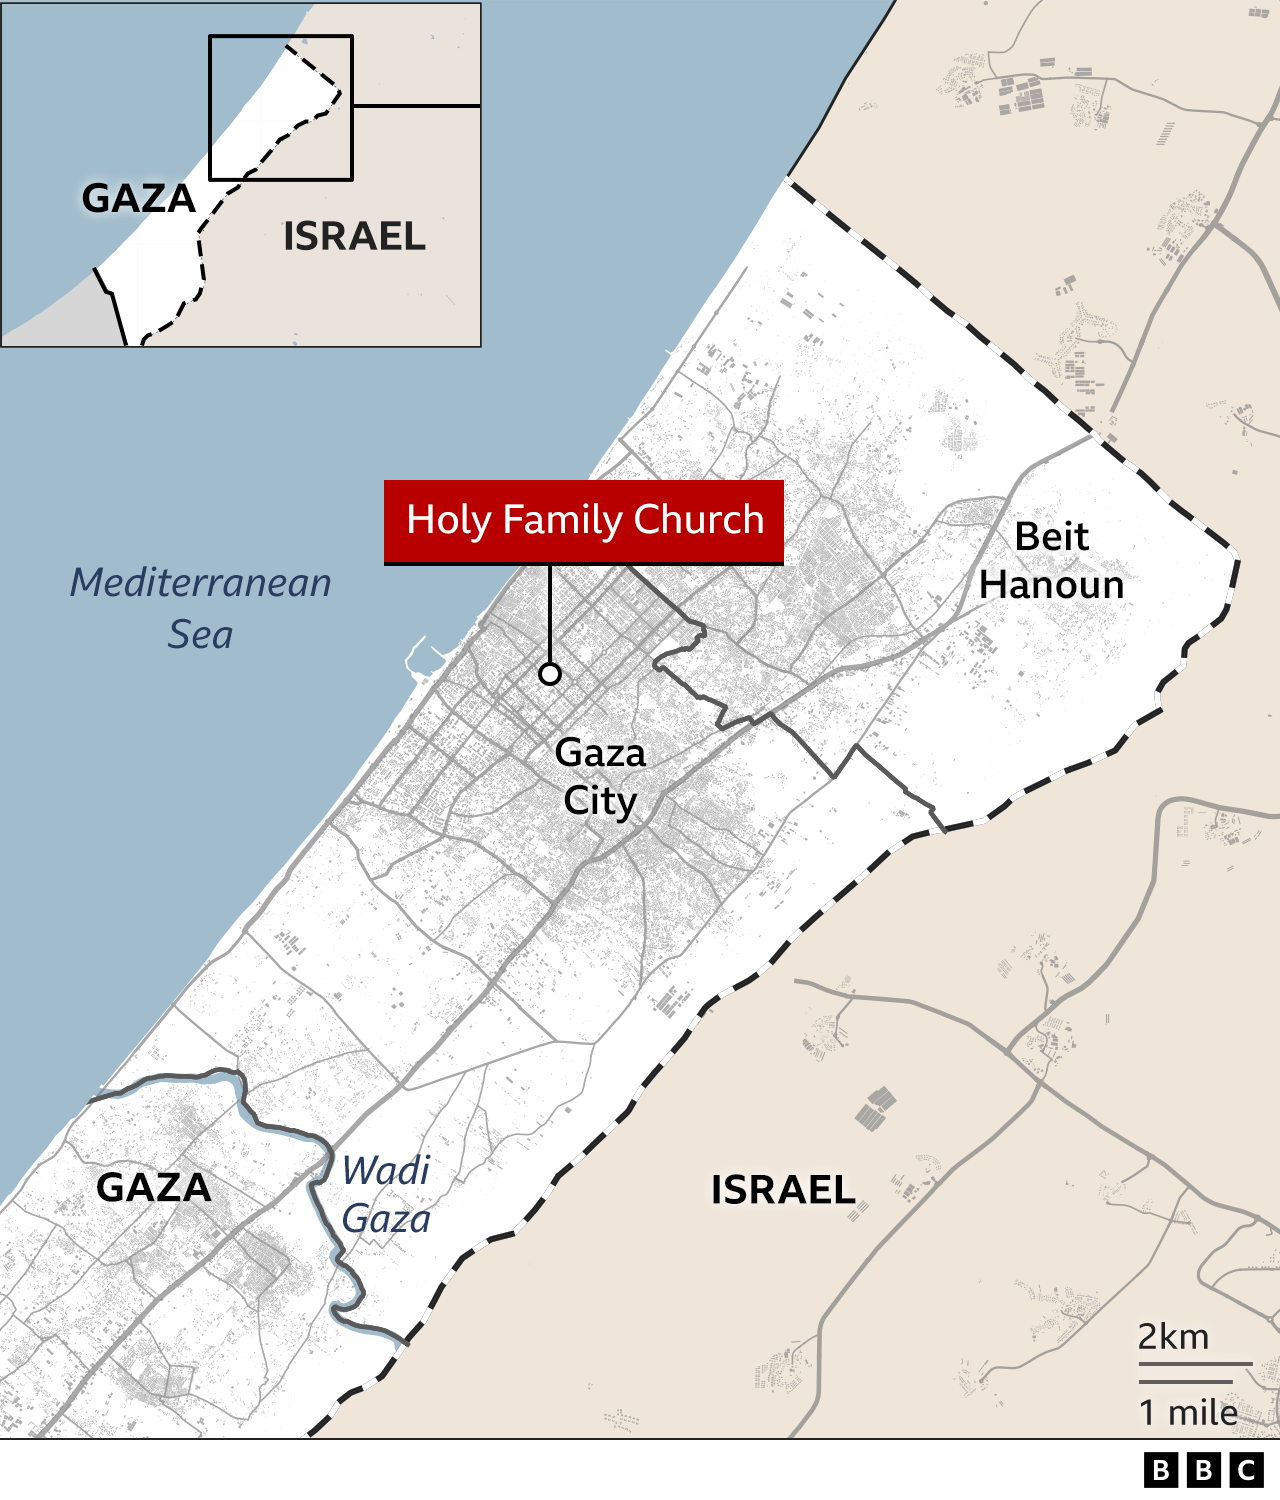 Map of Gaza City showing location of the Holy Family Church